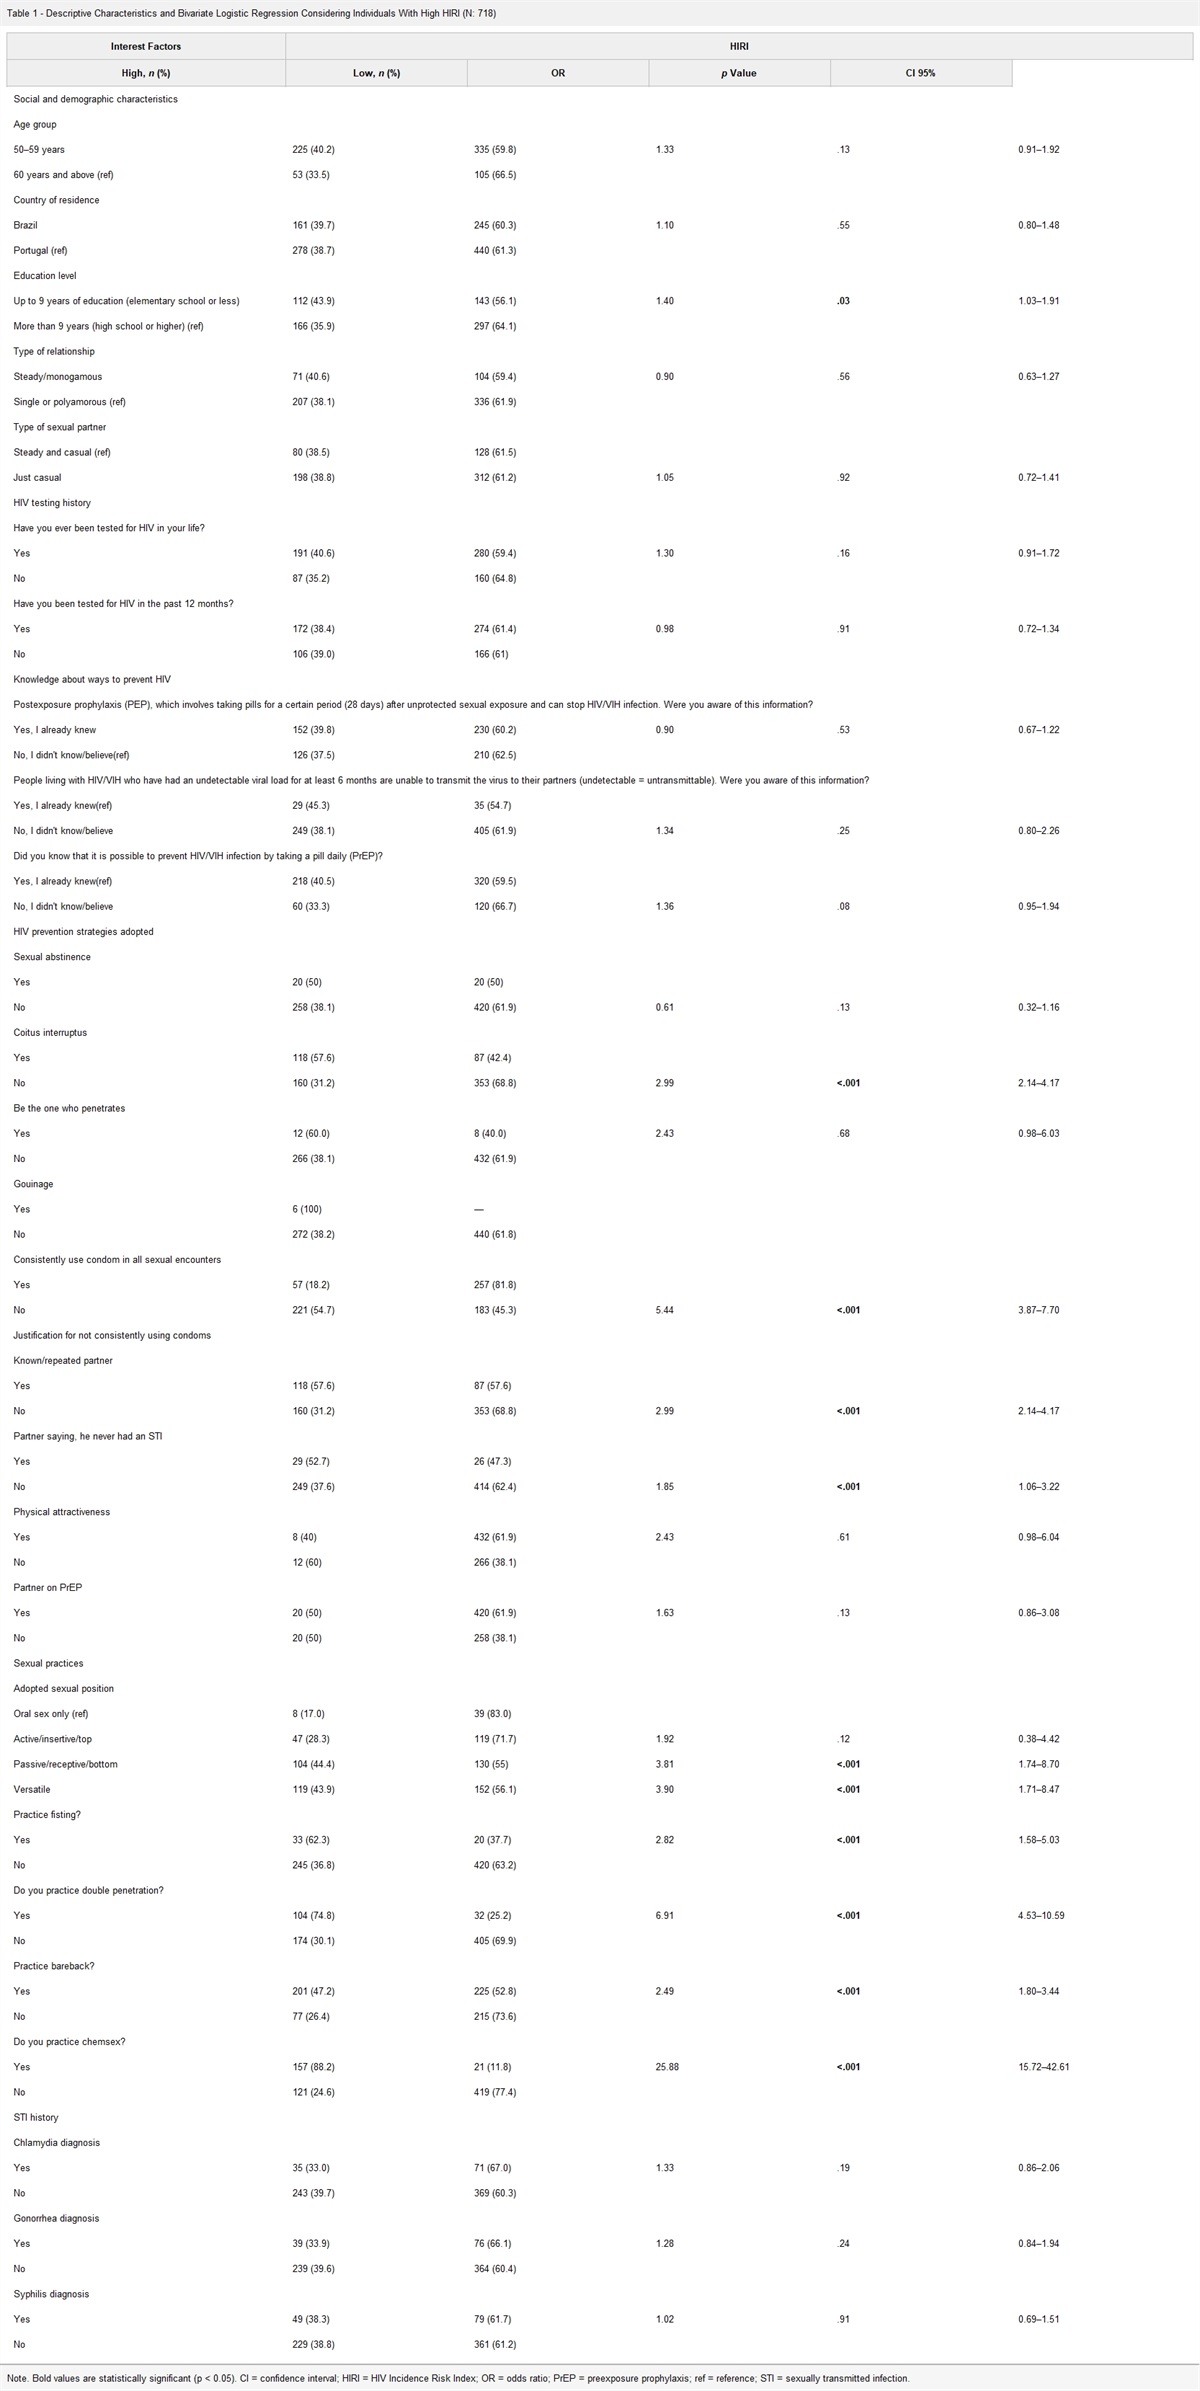 Sexual Practices and Predisposition to PrEP Use Among Men Ages 50 Years and Older Who Have Sex With Men: A Cross-Sectional Study